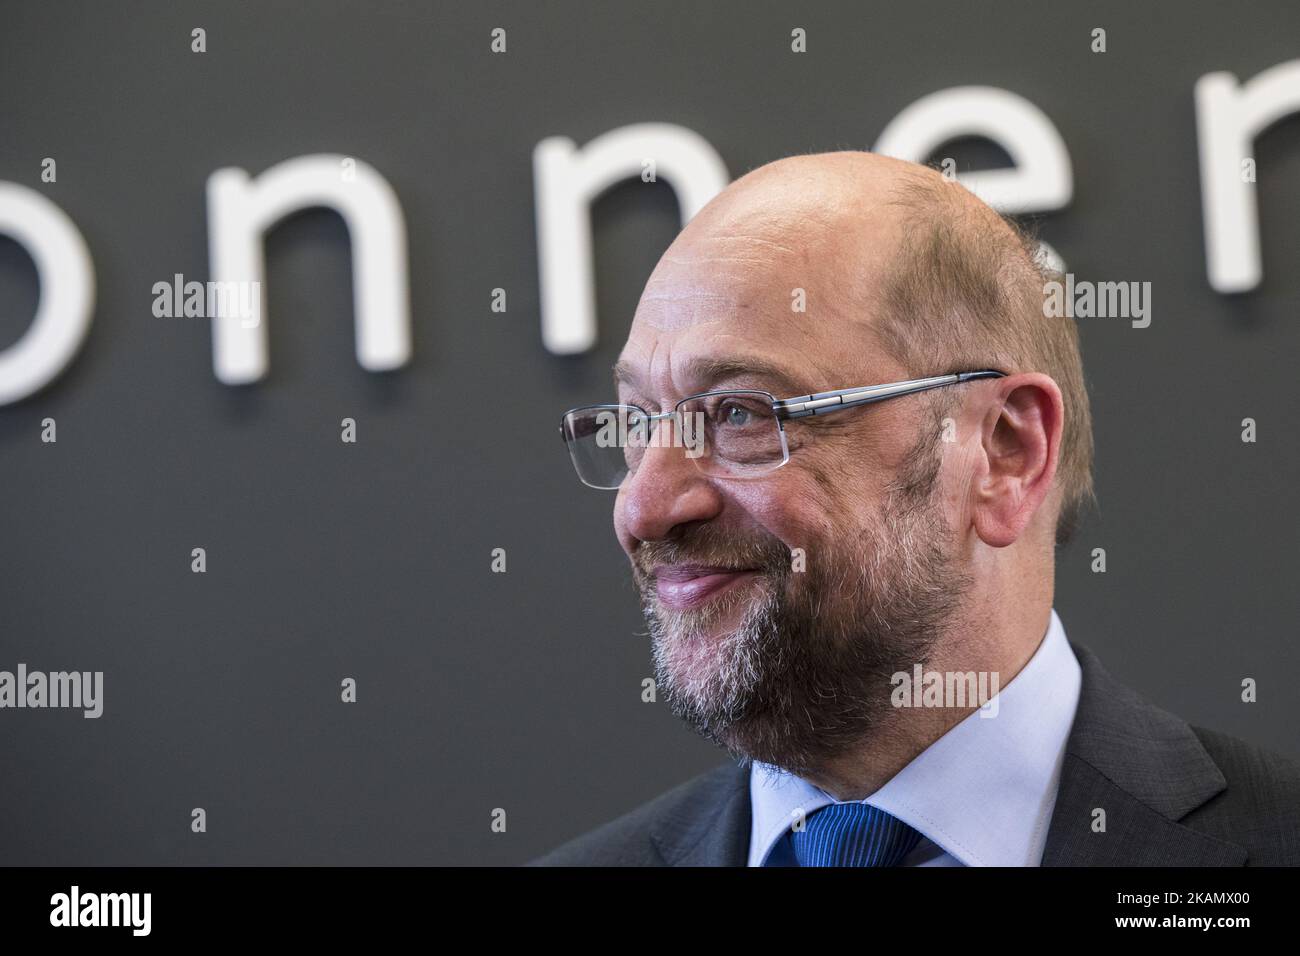 Chancellor candidate and chairman of SPD (Social Democratic Party) Martin Schulz speaks to the media after his visit to the start-up Sonnen and a meeting with other start-up founders in Berlin, Germany on May 3, 2017. (Photo by Emmanuele Contini/NurPhoto) *** Please Use Credit from Credit Field *** Stock Photo